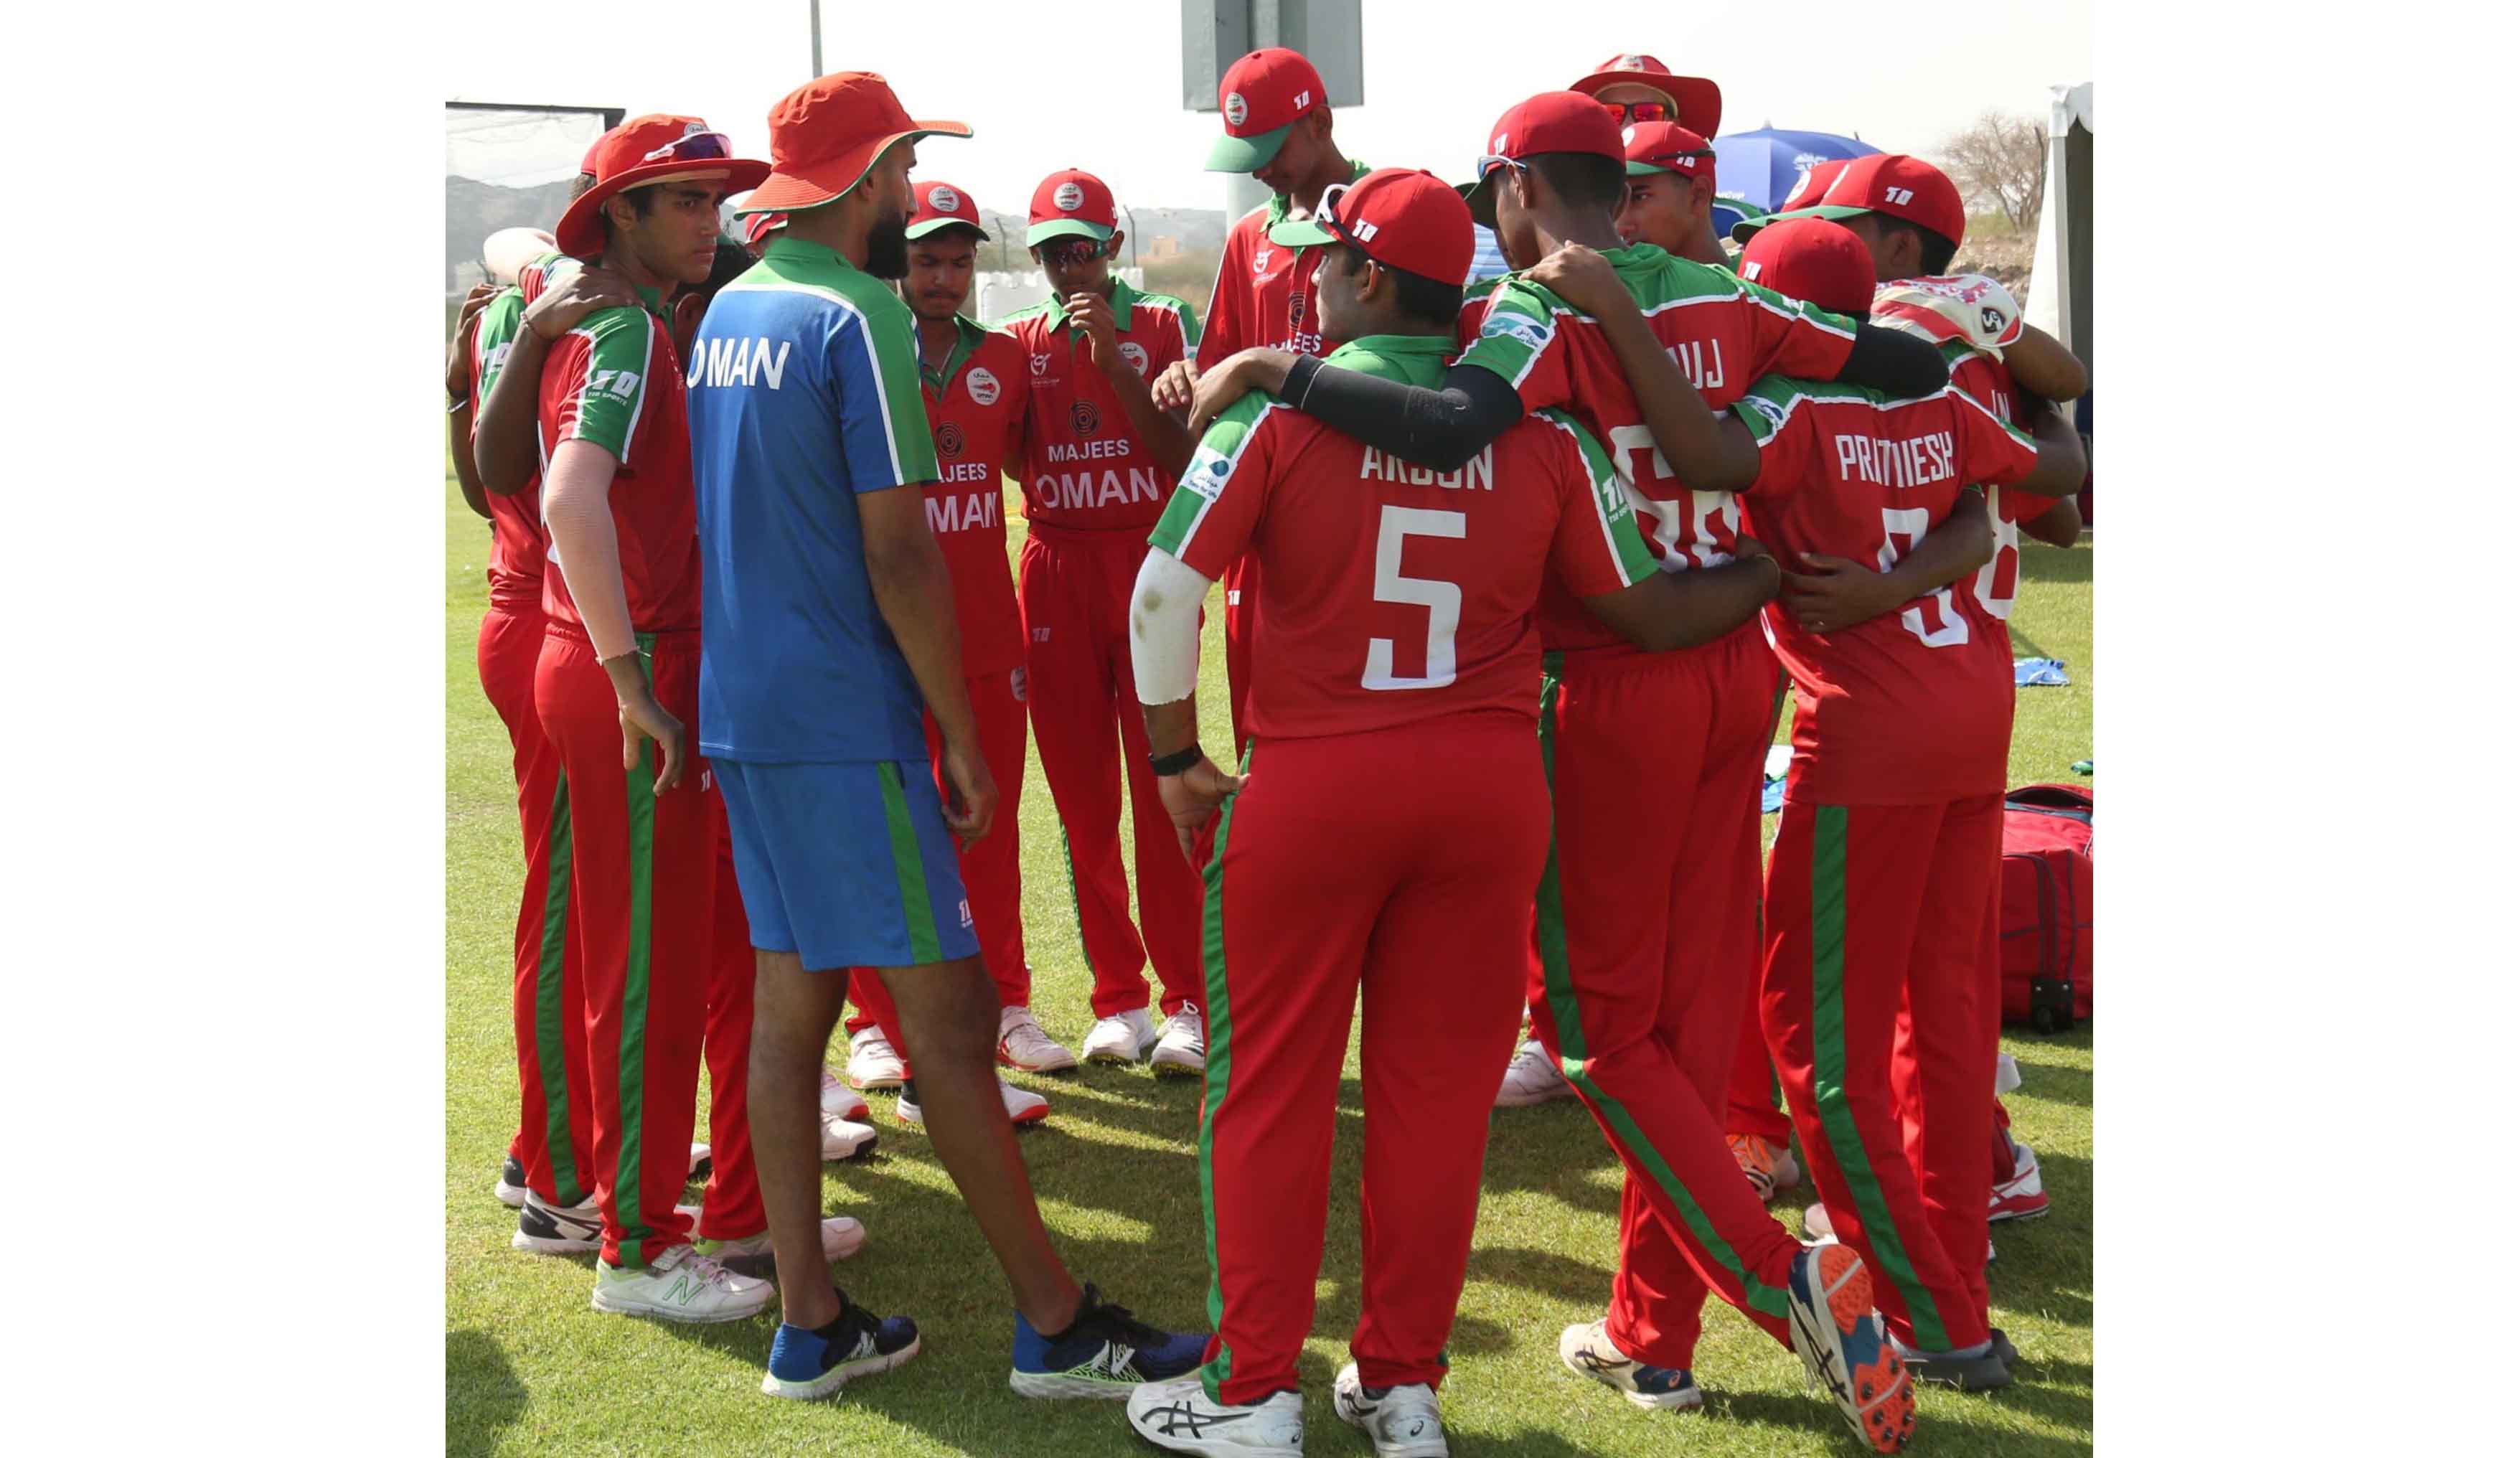 Coach Adeel Shafique talking to the Oman U19 boys during a practice session1